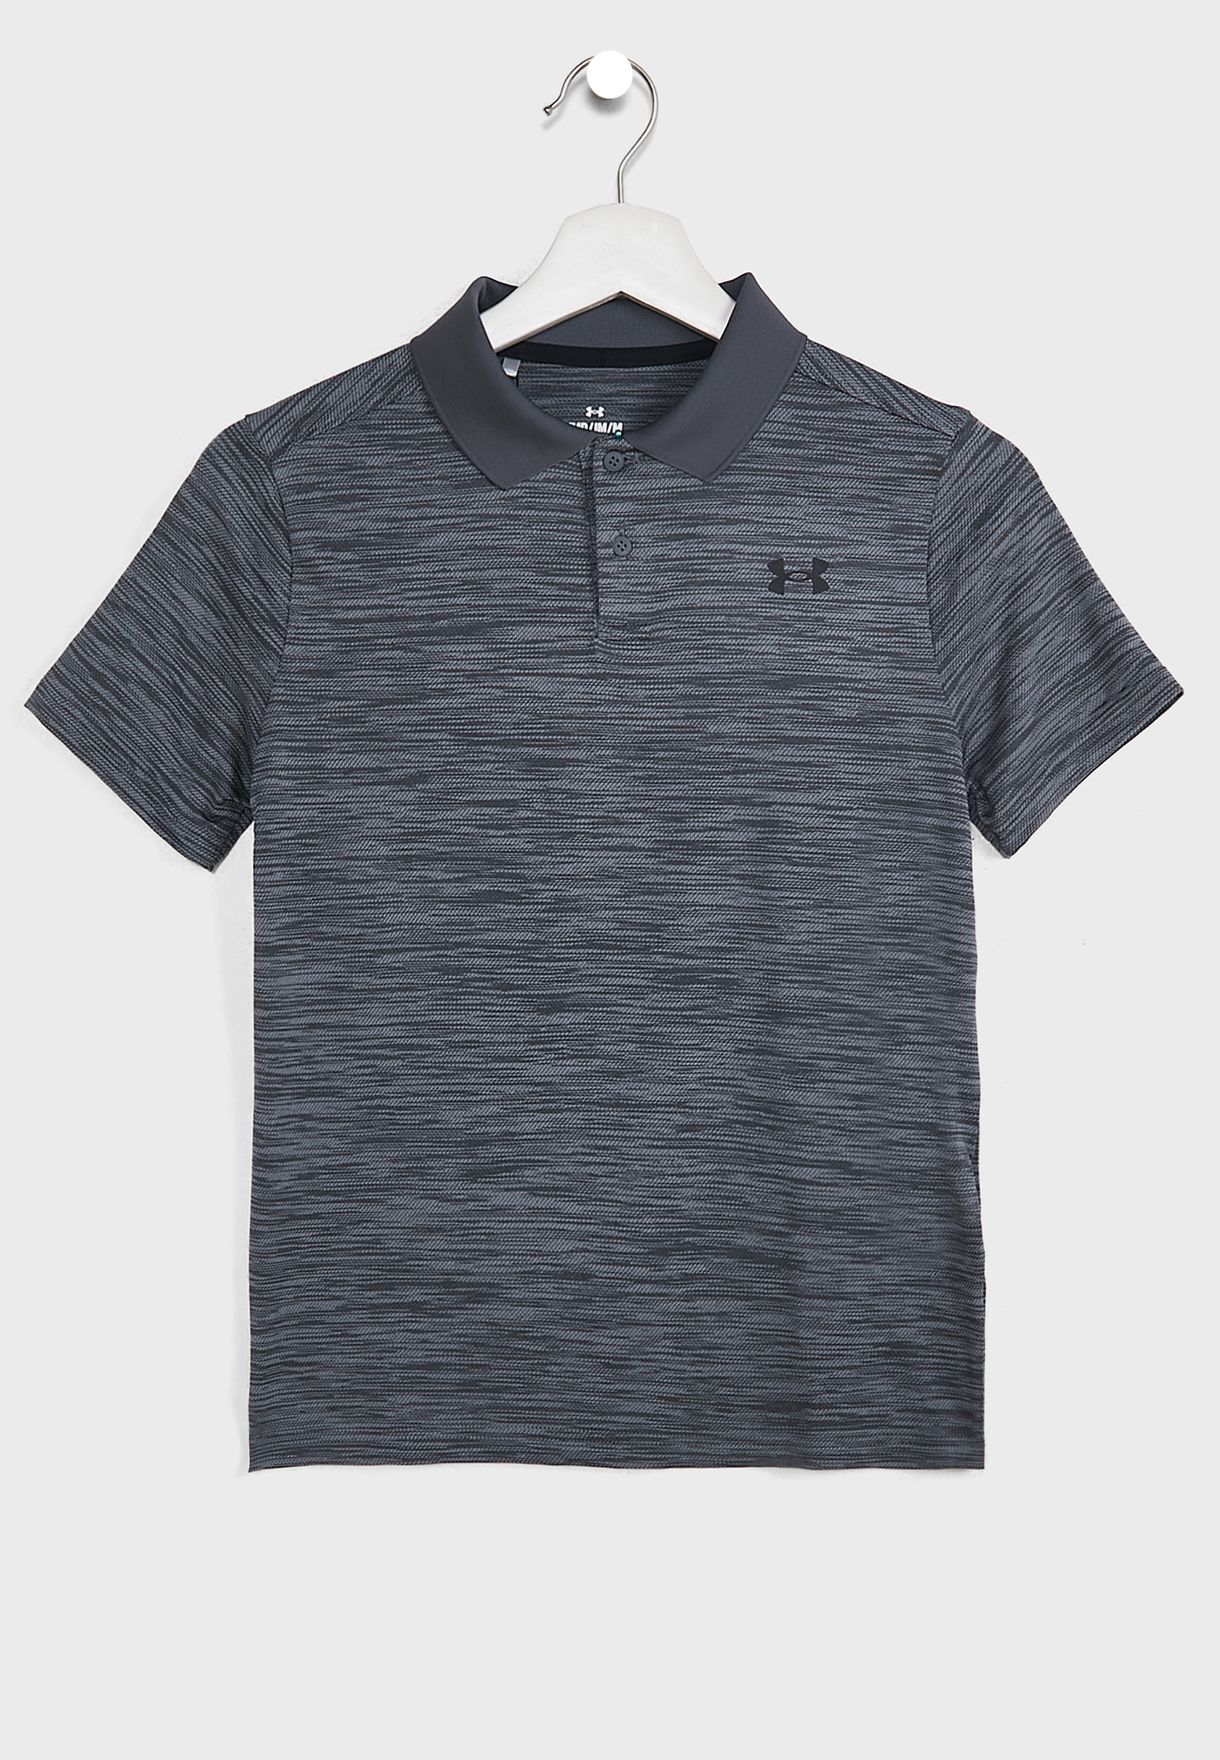 Youth Performance Polo